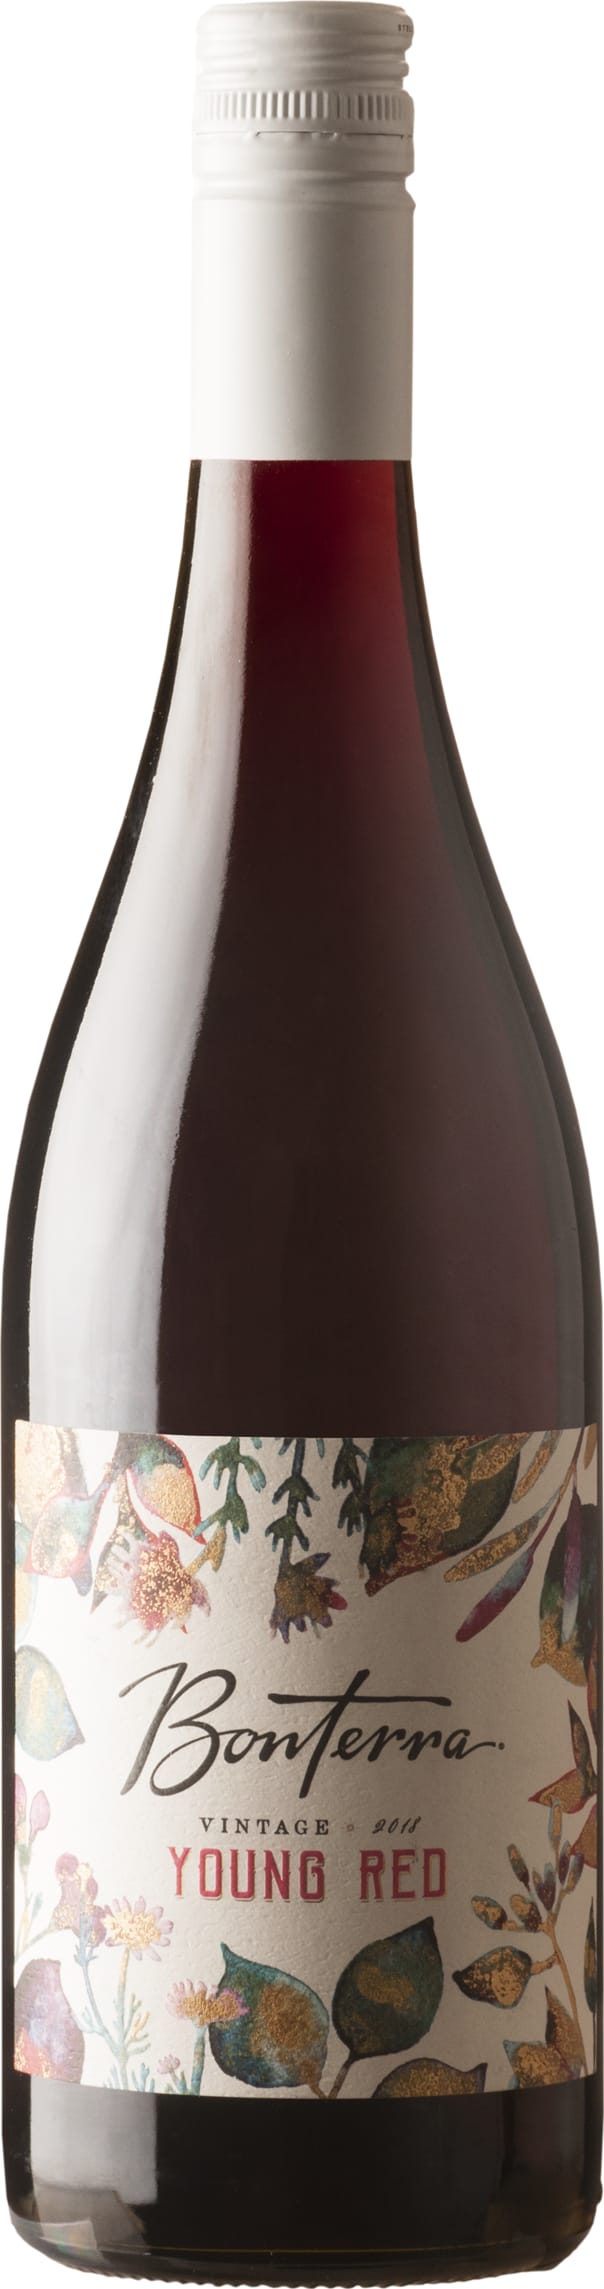 Bonterra Young Red 2020 75cl - Buy Bonterra Wines from GREAT WINES DIRECT wine shop